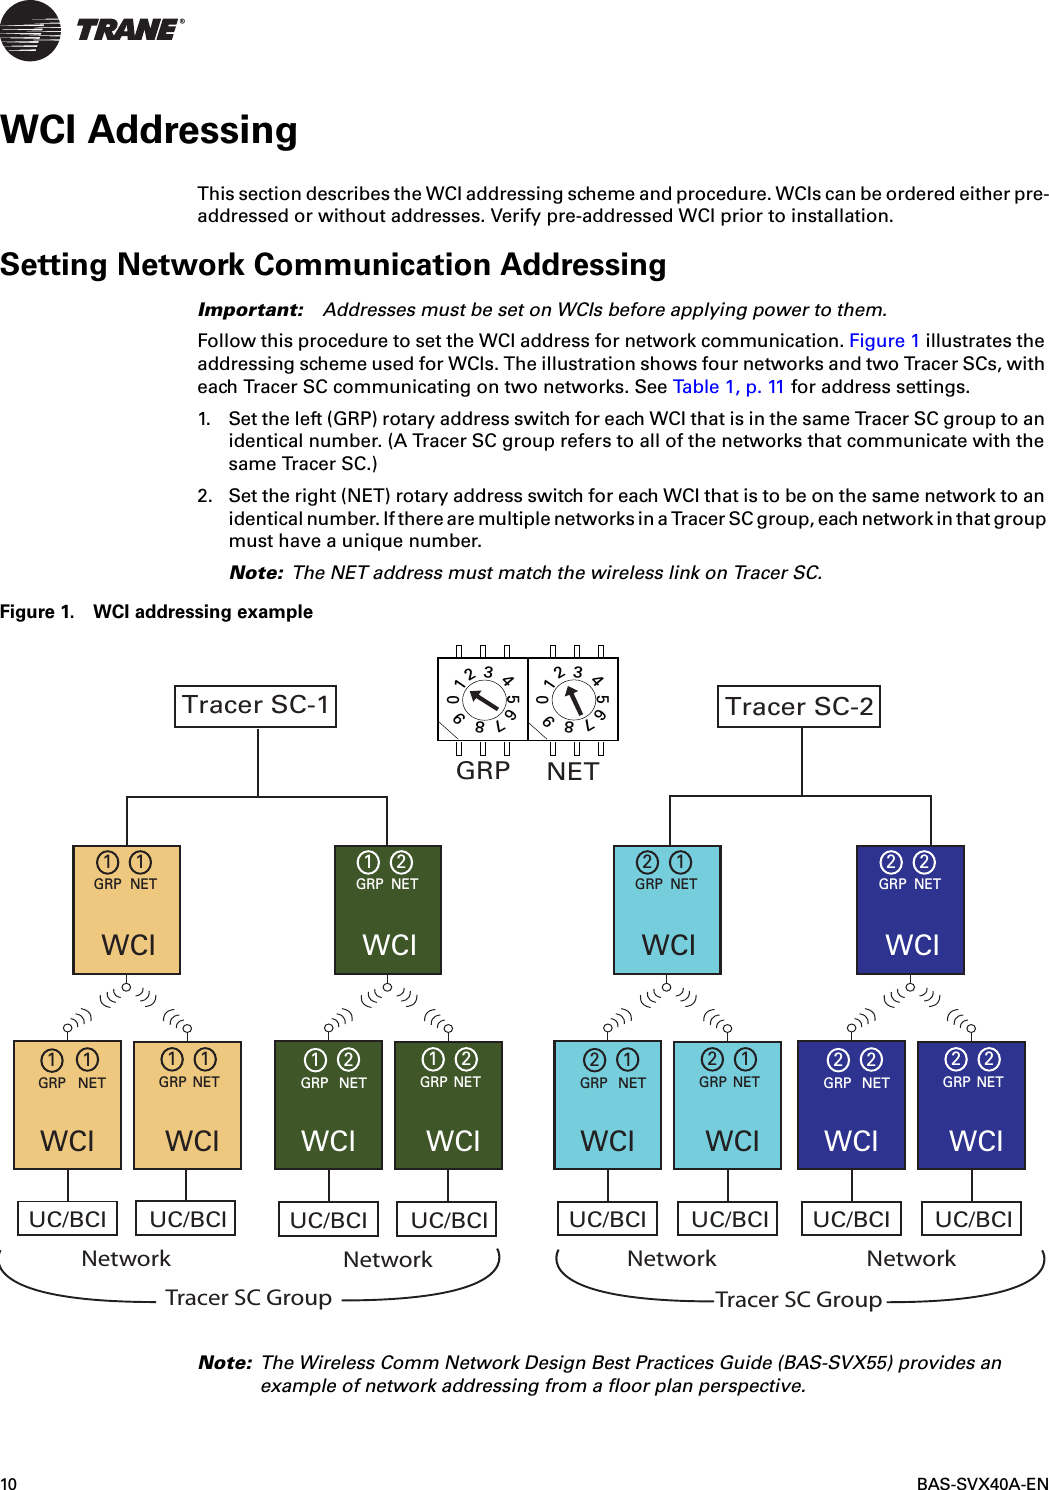 10 BAS-SVX40A-ENWCI AddressingThis section describes the WCI addressing scheme and procedure. WCIs can be ordered either pre-addressed or without addresses. Verify pre-addressed WCI prior to installation.Setting Network Communication AddressingImportant: Addresses must be set on WCIs before applying power to them.Follow this procedure to set the WCI address for network communication. Figure 1 illustrates the addressing scheme used for WCIs. The illustration shows four networks and two Tracer SCs, with each Tracer SC communicating on two networks. See Table 1, p. 11 for address settings.1. Set the left (GRP) rotary address switch for each WCI that is in the same Tracer SC group to an identical number. (A Tracer SC group refers to all of the networks that communicate with the same Tracer SC.)2. Set the right (NET) rotary address switch for each WCI that is to be on the same network to an identical number. If there are multiple networks in a Tracer SC group, each network in that group must have a unique number. Note: The NET address must match the wireless link on Tracer SC.Figure 1. WCI addressing exampleNote: The Wireless Comm Network Design Best Practices Guide (BAS-SVX55) provides an example of network addressing from a floor plan perspective.UC/BCITracer SC-1UC/BCIWCI WCIGRP  NET NETGRP  NET11111WCIWCI WCIGRP  NETGRP NETGRP  NET12 1212WCIWCI WCIGRP  NETGRP NETGRP  NET21 2121WCIWCI WCIGRP  NETGRP NETGRP  NET22 2222WCIUC/BCI UC/BCI UC/BCI UC/BCI UC/BCI UC/BCIGRP1Tracer SC-2Network NetworkNetworkNetworkTracer SC Group Tracer SC Group1234567890NETGRP1234567890